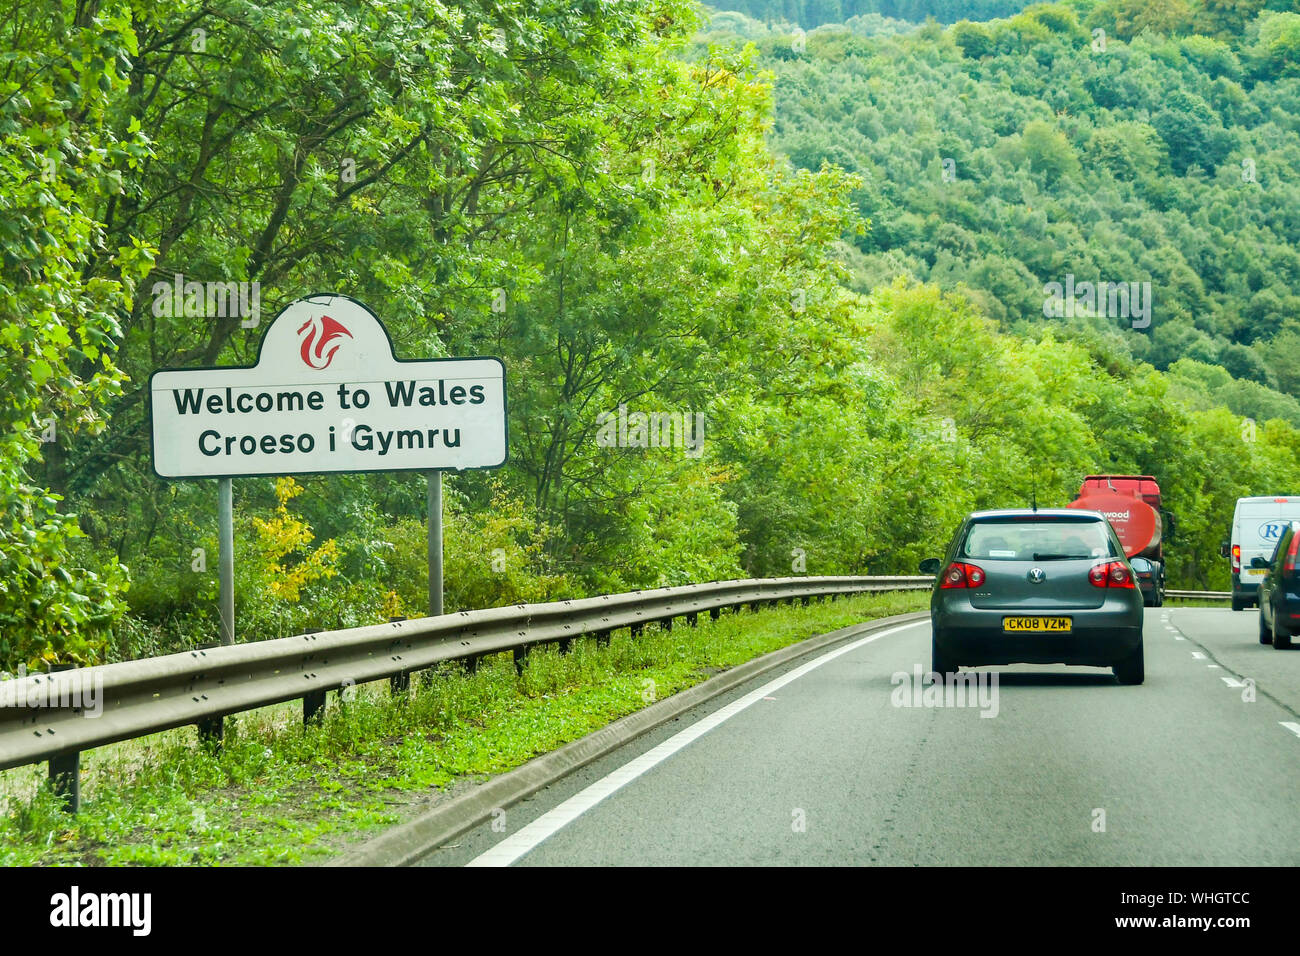 MONMOUTH, WALES - SEPTEMBER 2018: 'Welcome to Wales' sign on the side of the A40 trunk road near Monmouth Stock Photo